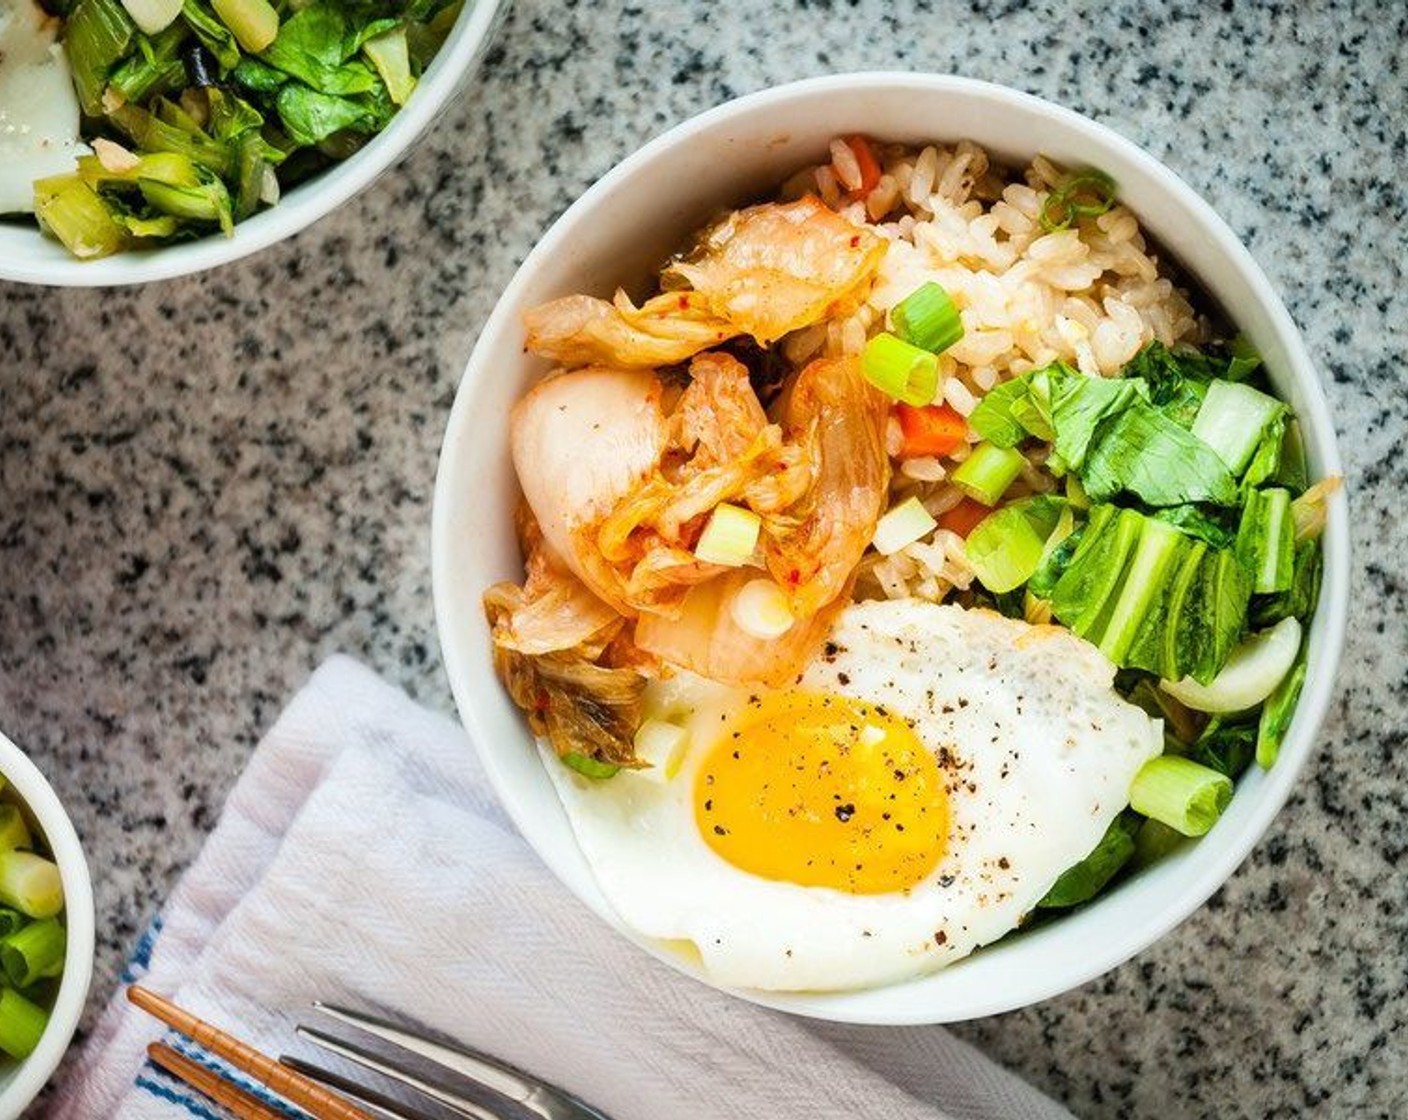 step 11 Divide rice among bowls. Top each bowl with bok choy mixture, egg, sliced scallions, and a large spoonful of Kimchi (to taste). Enjoy!